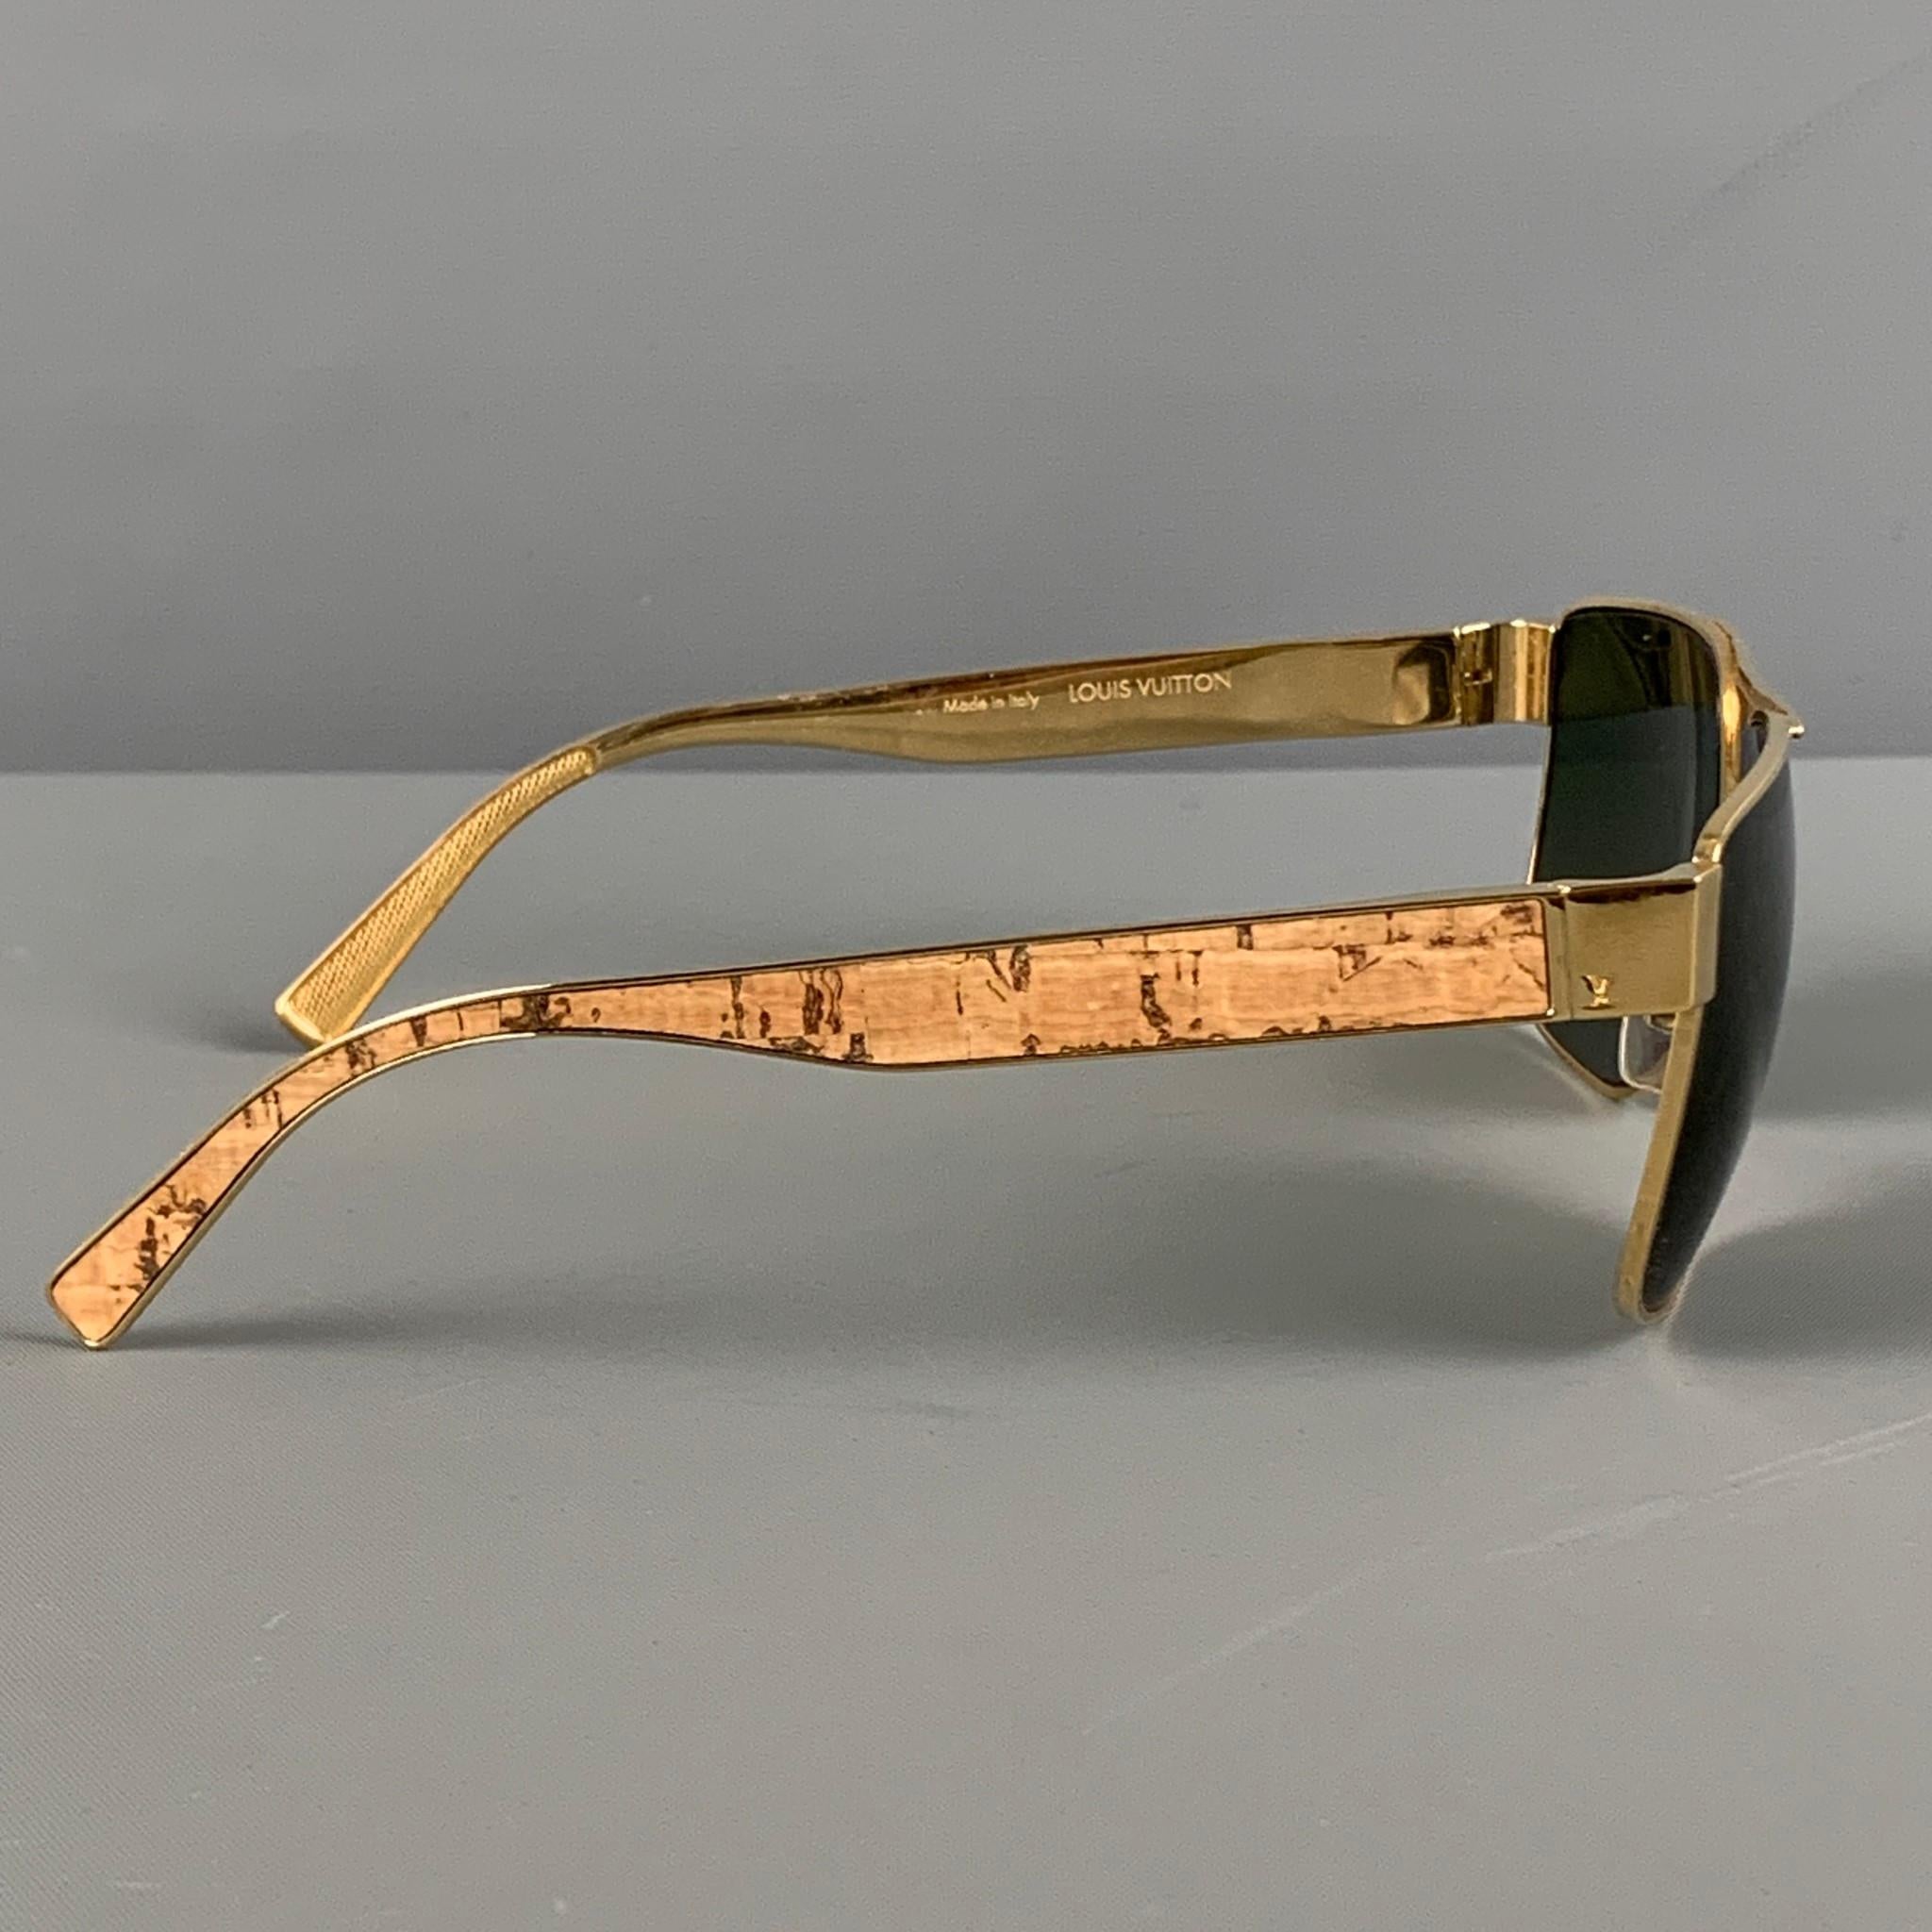 LOUIS VUITTON sunglasses comes in a gold tone metal with a wood grain trim featuring tinted lenses. Includes case. Made in Italy. 

Very Good Pre-Owned Condition.
Marked: Z0797U 948 57-17 140 S0126

Measurements:

Length: 14 cm.
Height: 5 cm. 